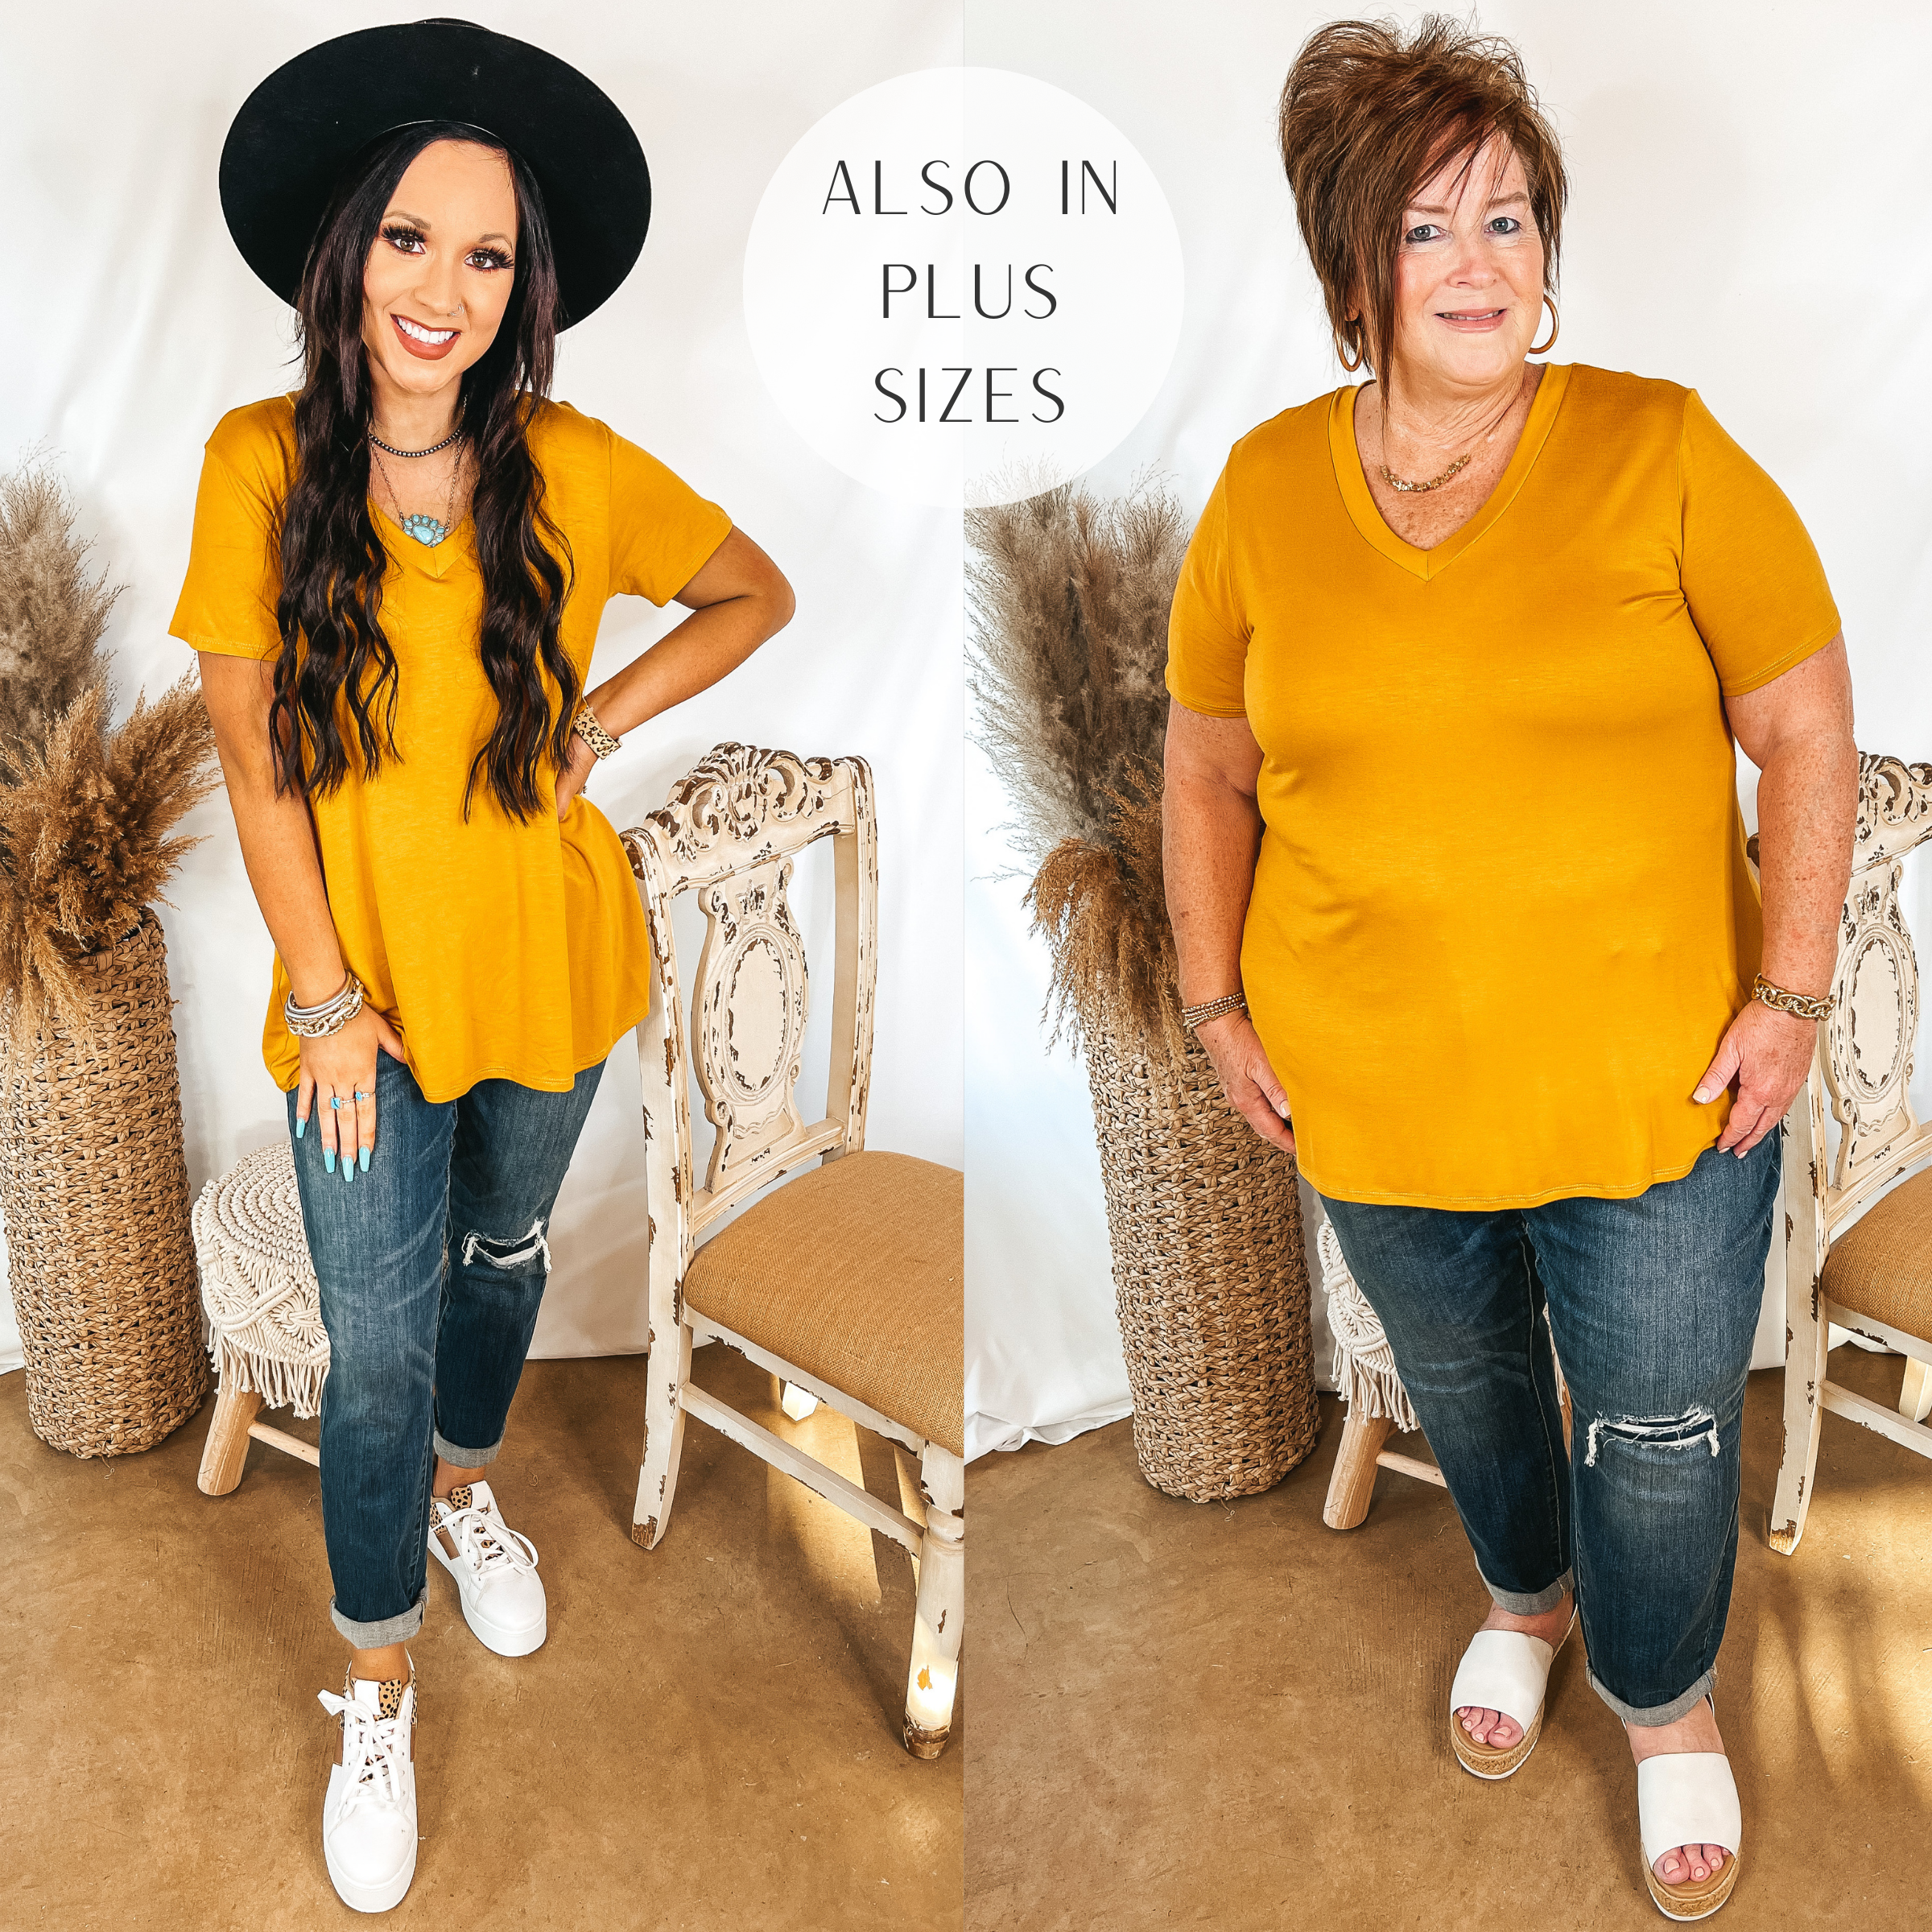 Models are wearing a mustard yellow v neck top. Size small model has it paired with medium wash boyfriend jeans, white sneakers, and a black hat. Plus size model has it paired with medium wash boyfriend jeans, white sandals, and gold jewelry.